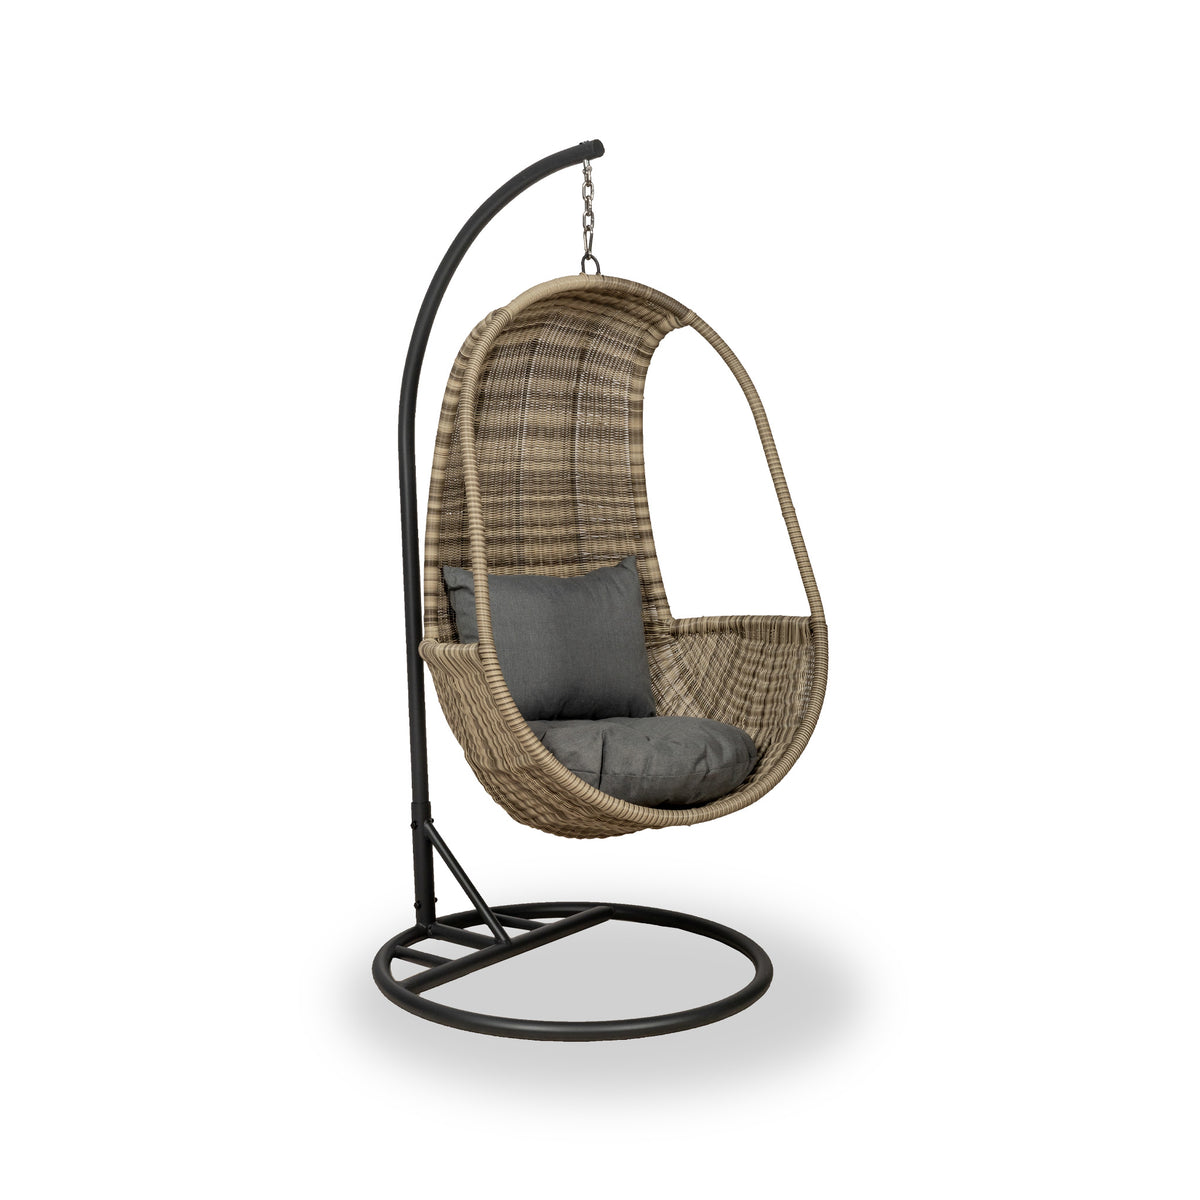 Wentworth Rattan Hanging Pod Chair from Roseland